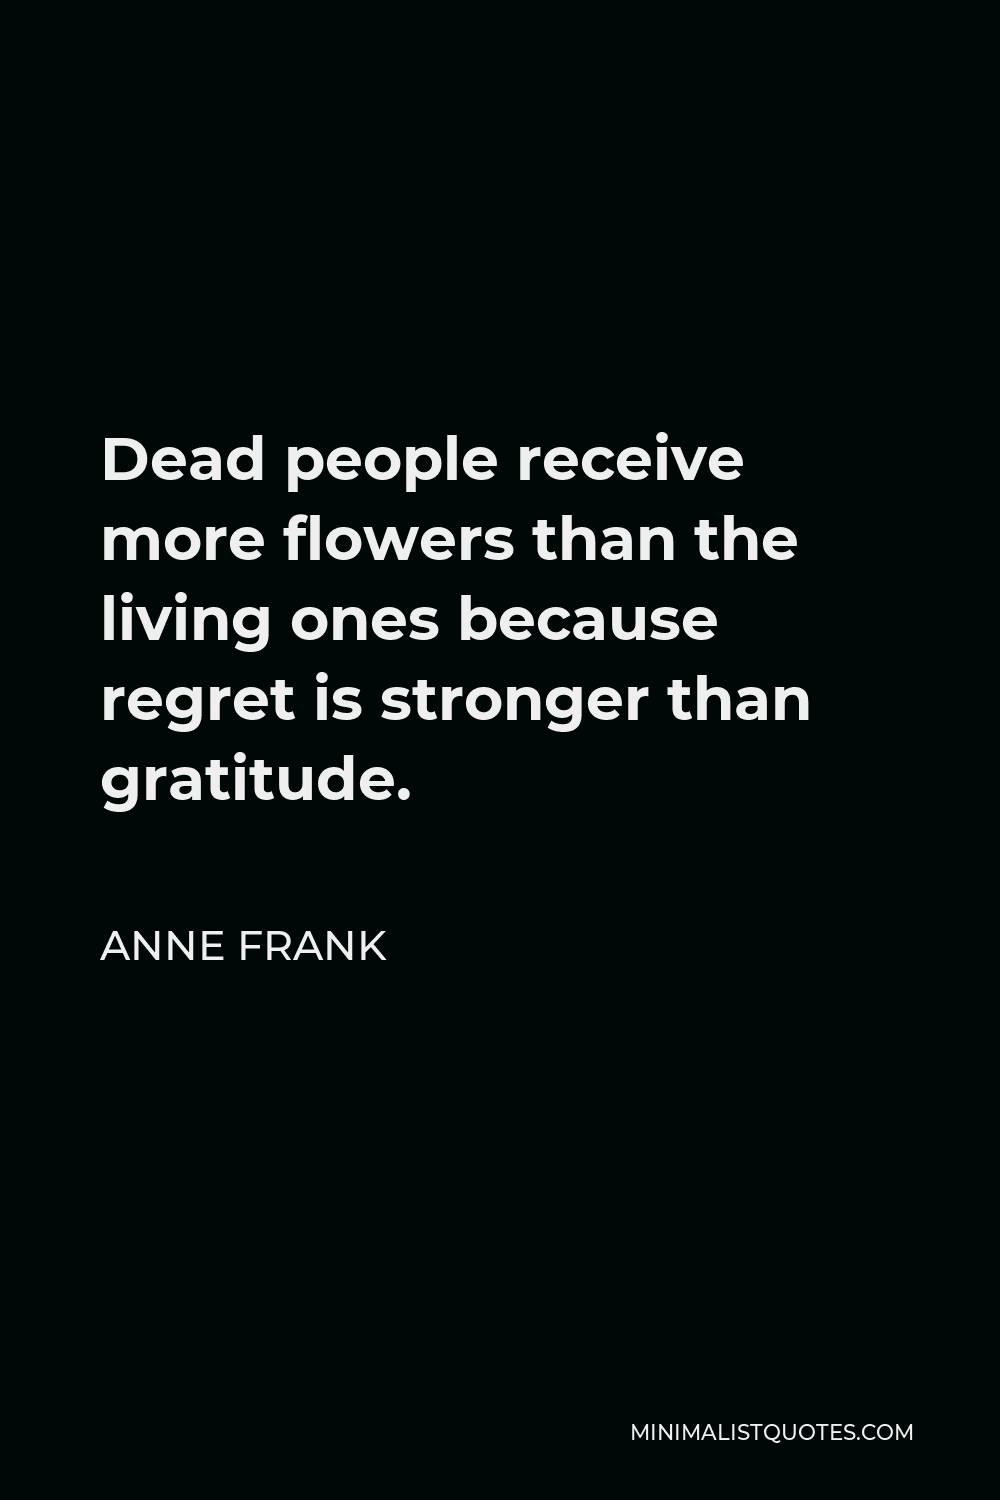 Anne Frank Quote: Dead people receive more flowers than the living ones ...